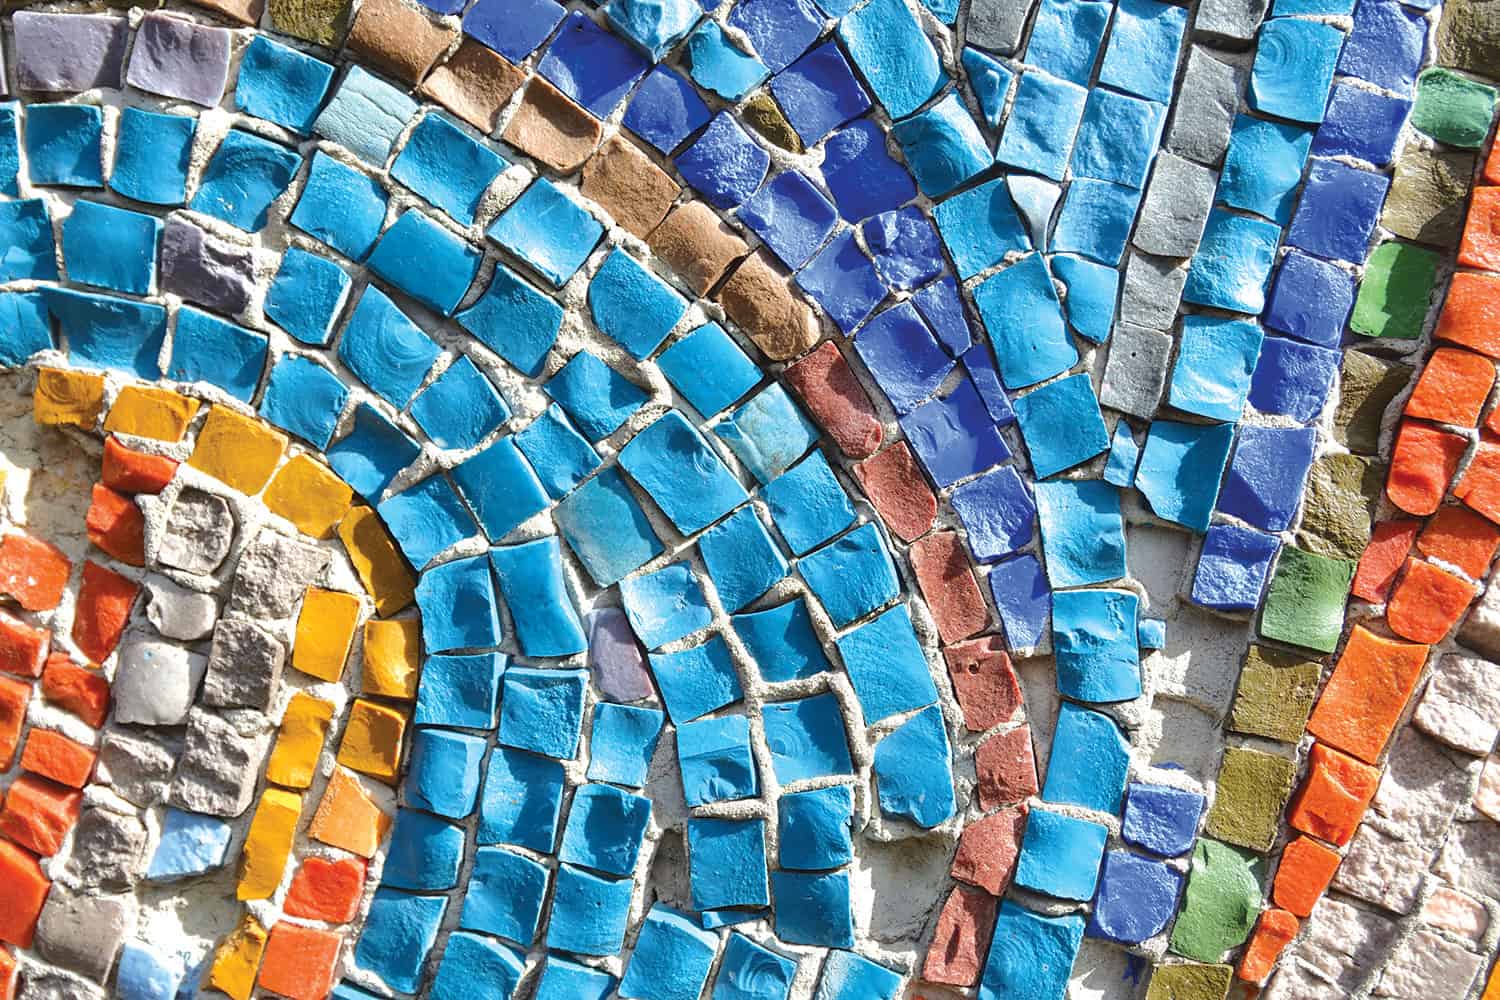 : close-up of mosaic of colourful stones set in grey filler – light and dark blue, orange, red, grey, green,yellow